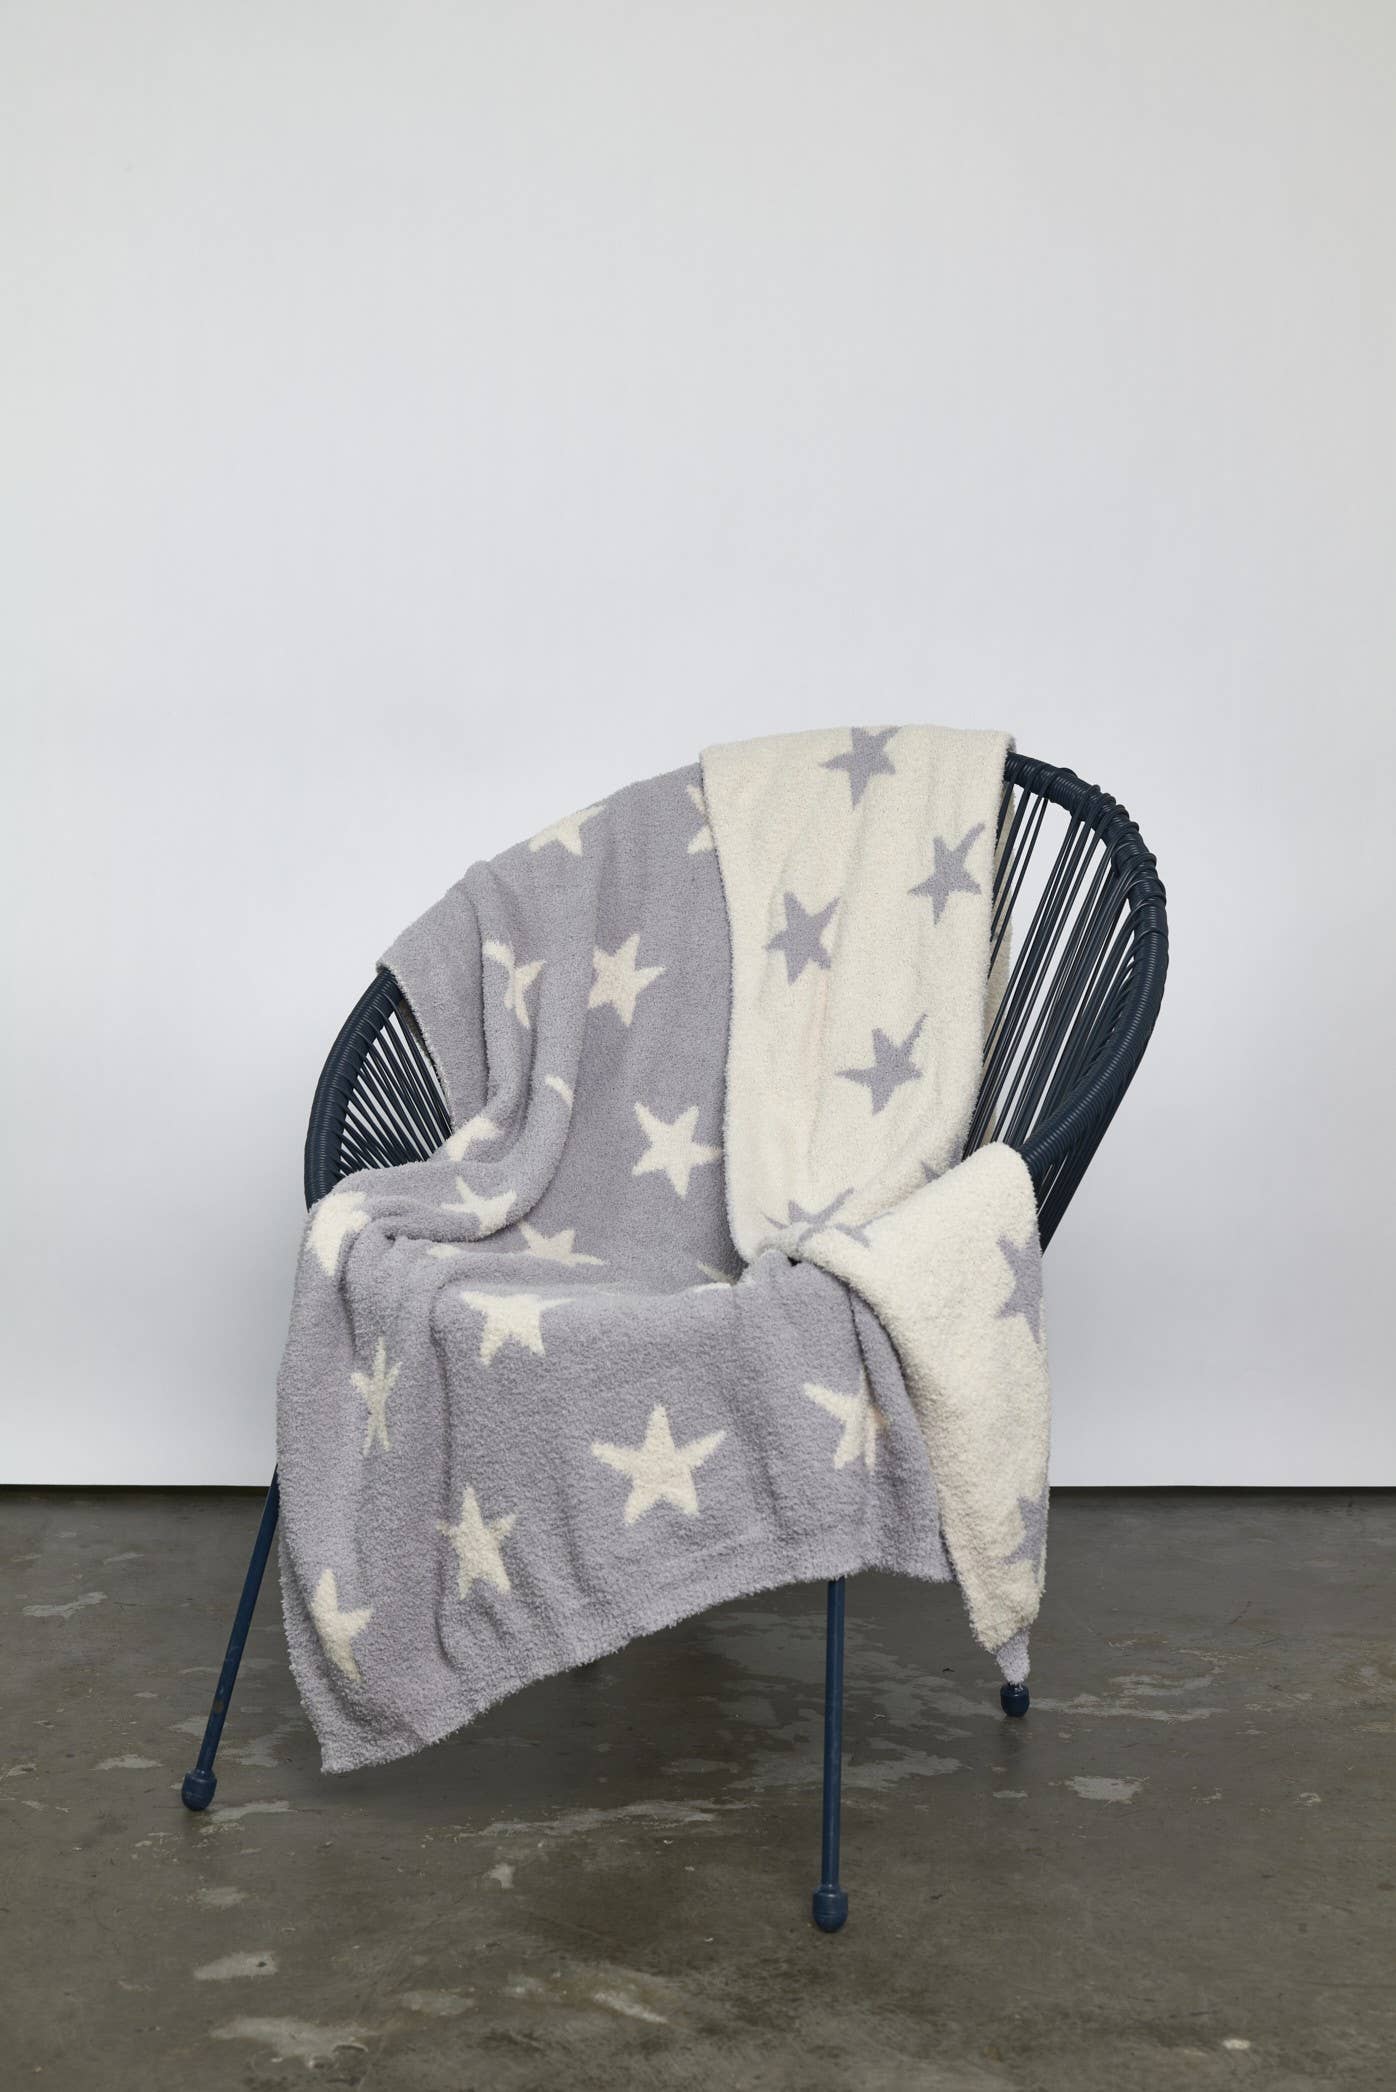 Taupe Star Throw Blanket